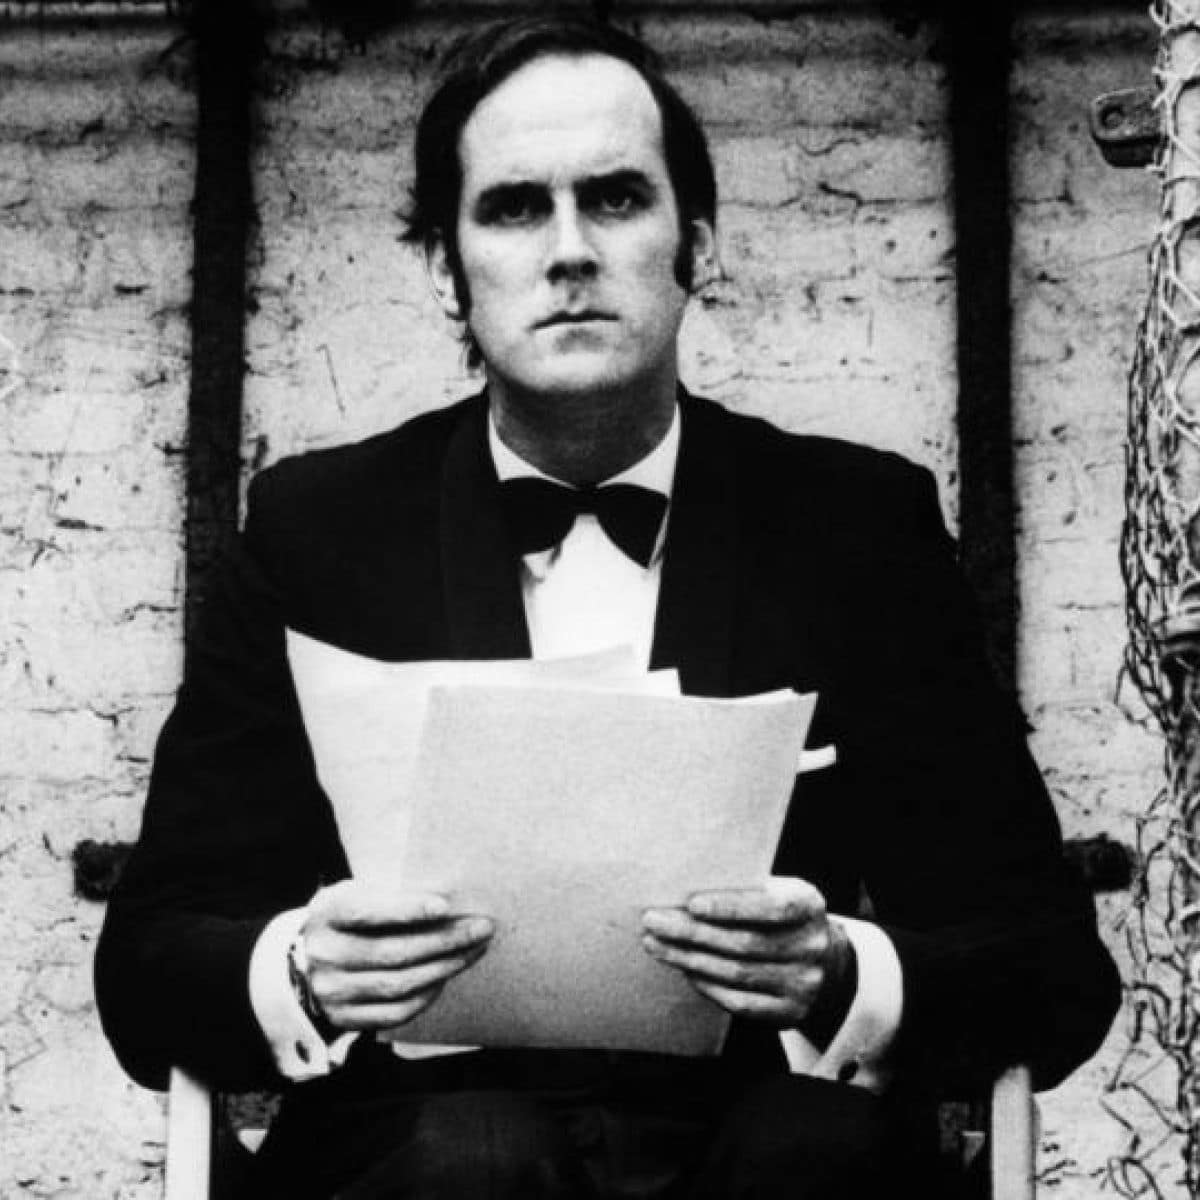 Copywriting and business lessons from comedy — John Cleese